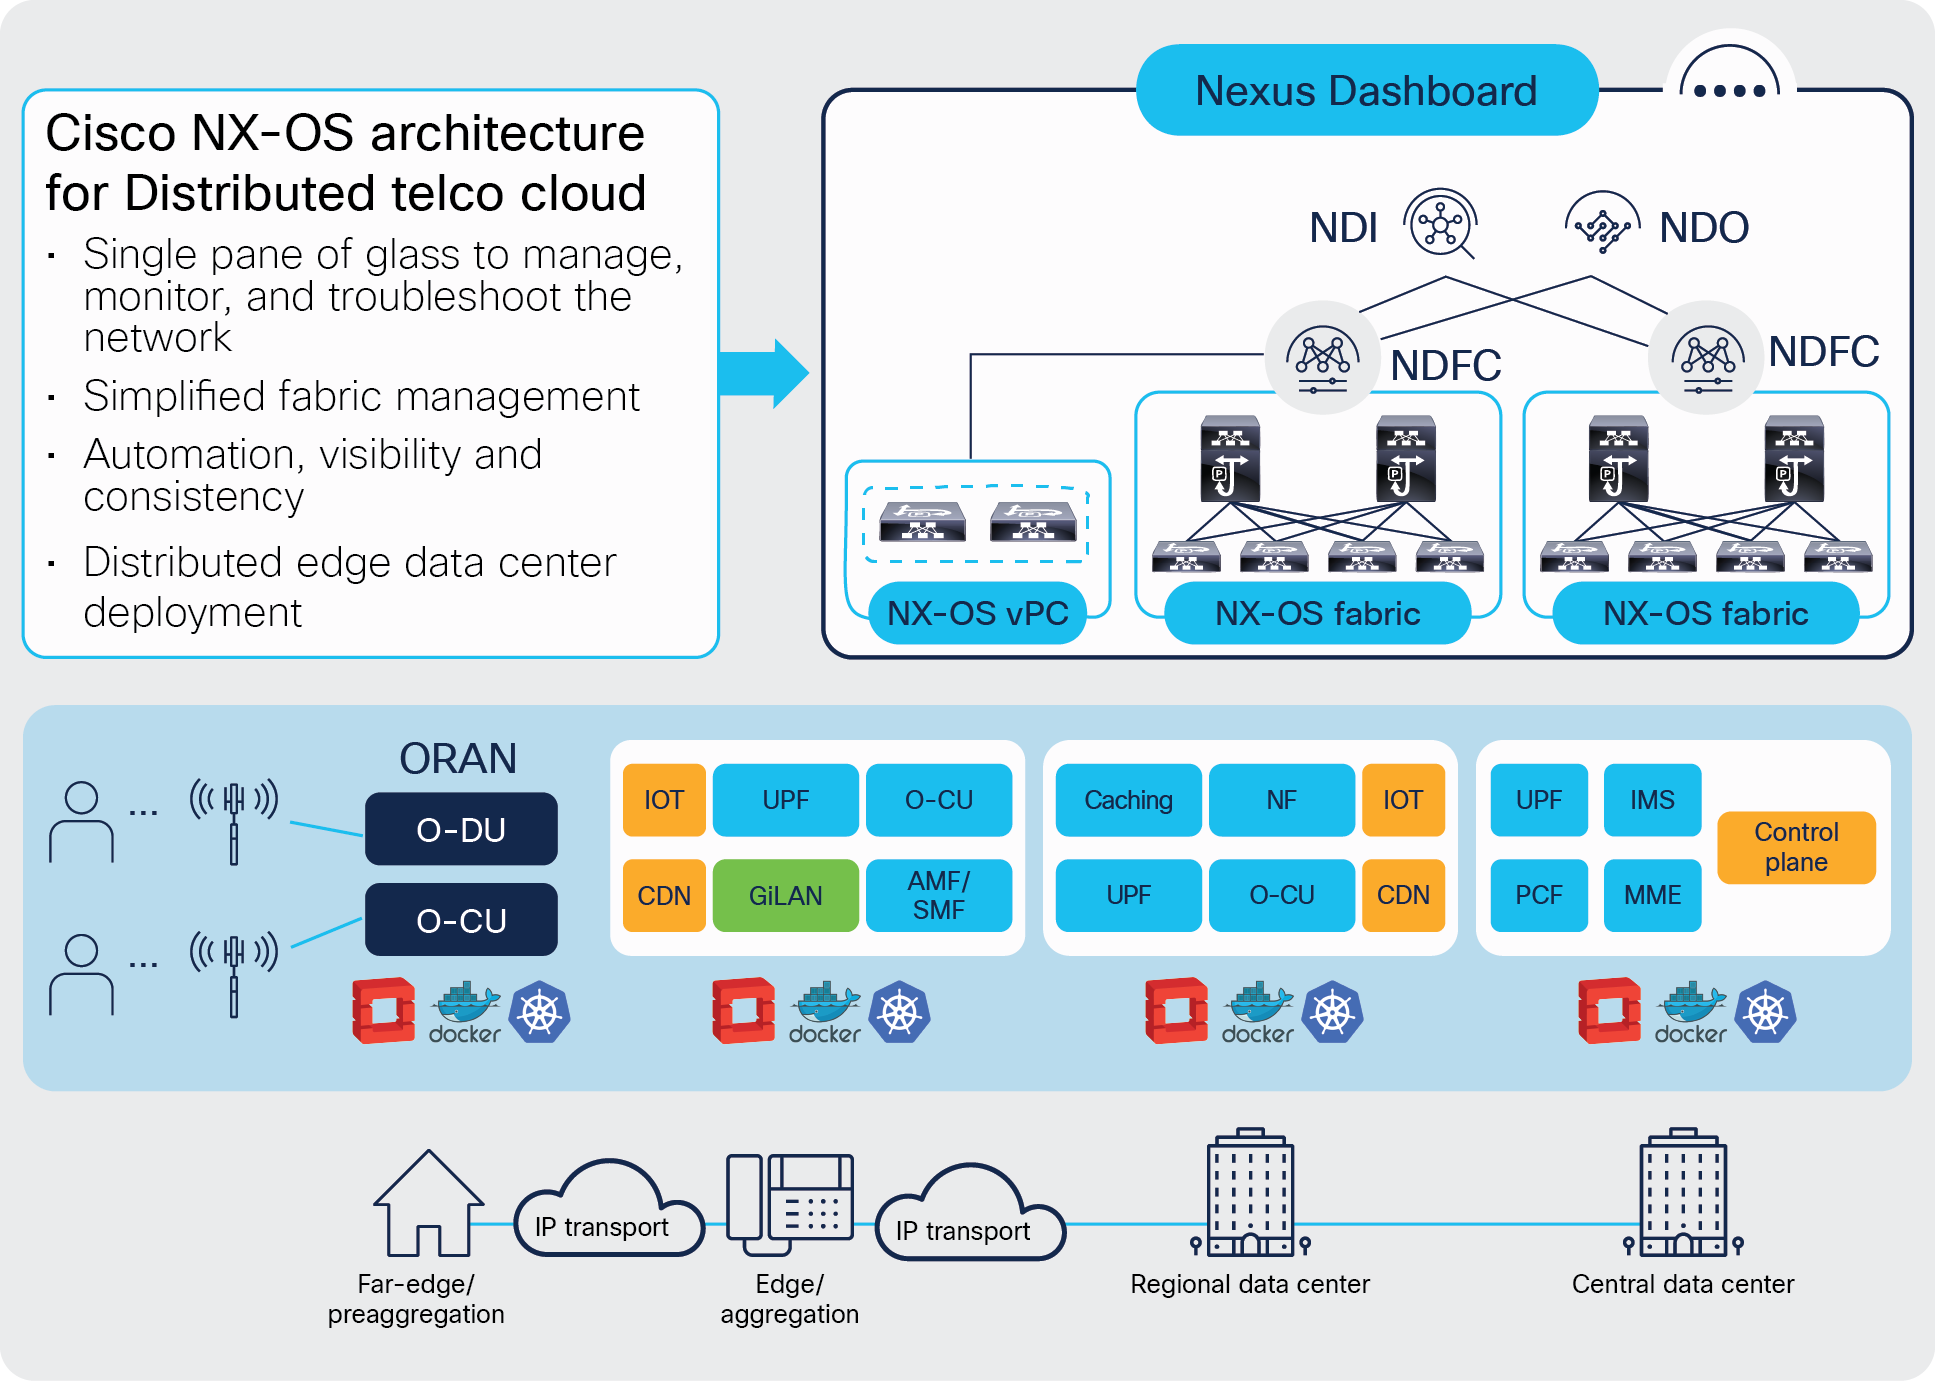 Cisco NX-OS architecture for distributed telco data centers